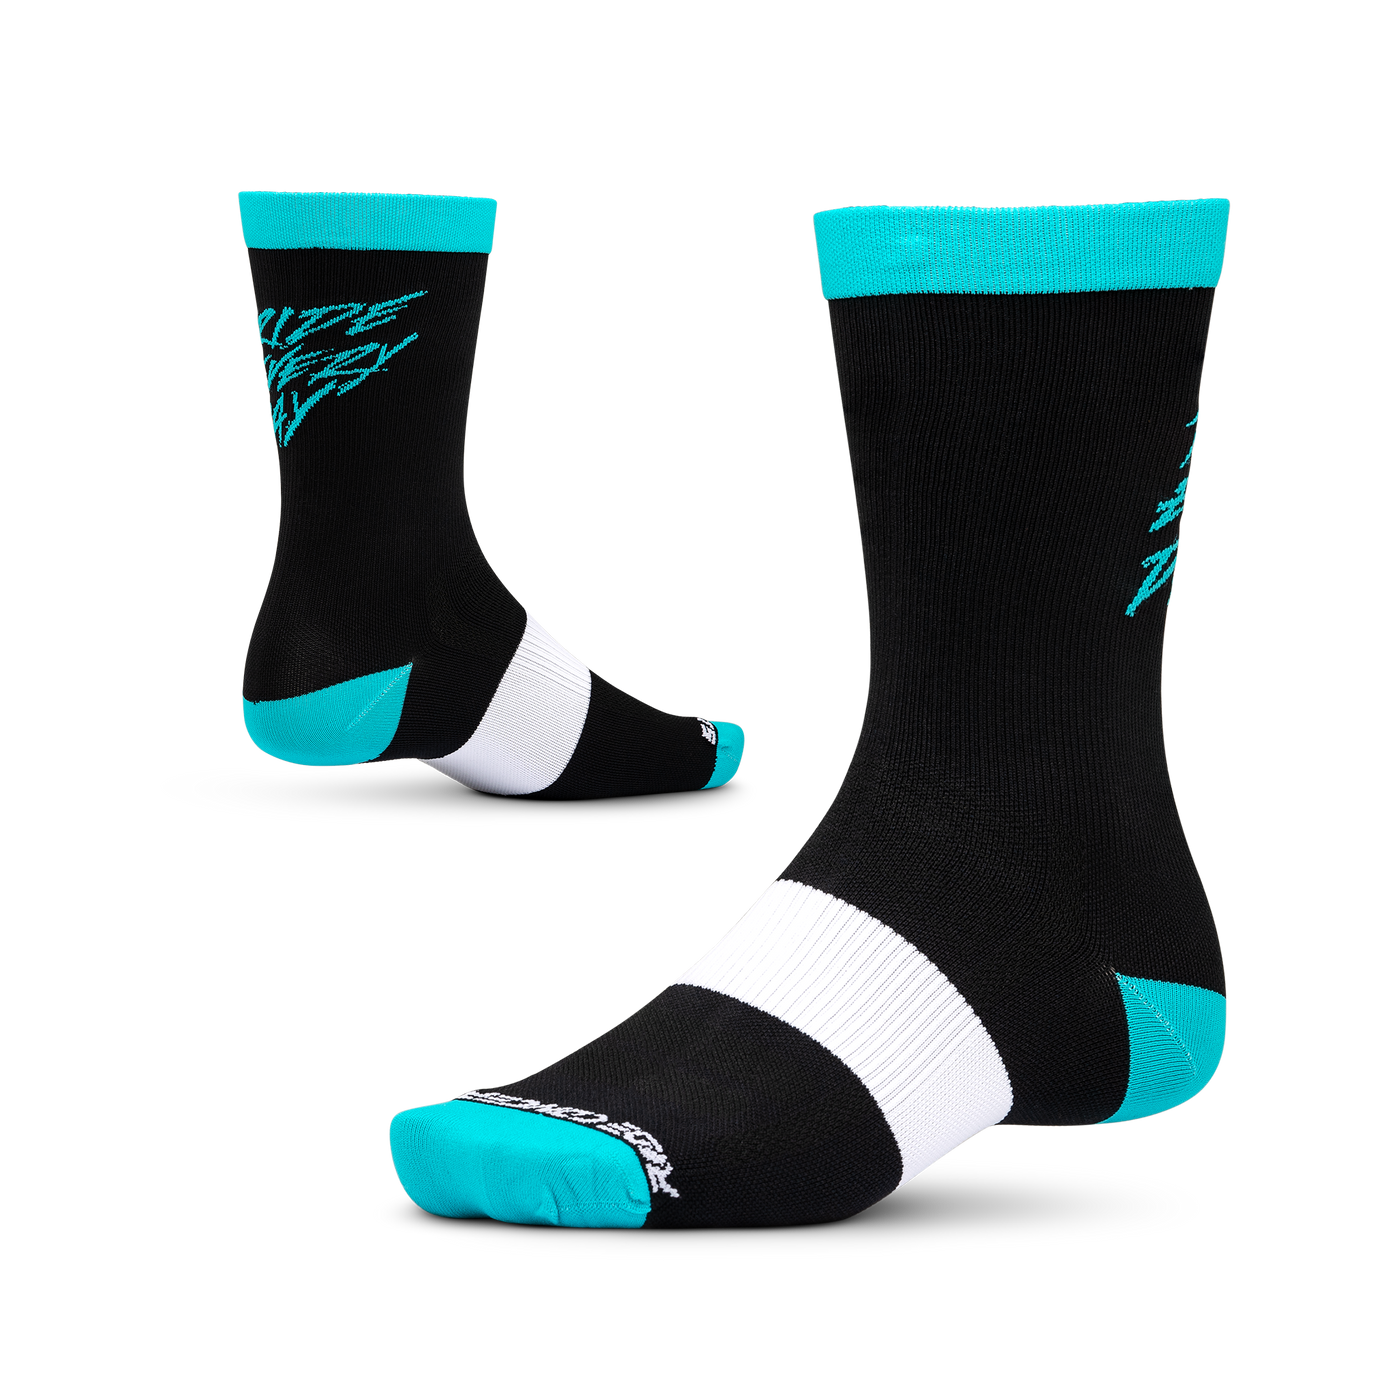 Ride Concepts Ride Every Day Youth MTB Sock - Synthetic 8" - Black and Aqua